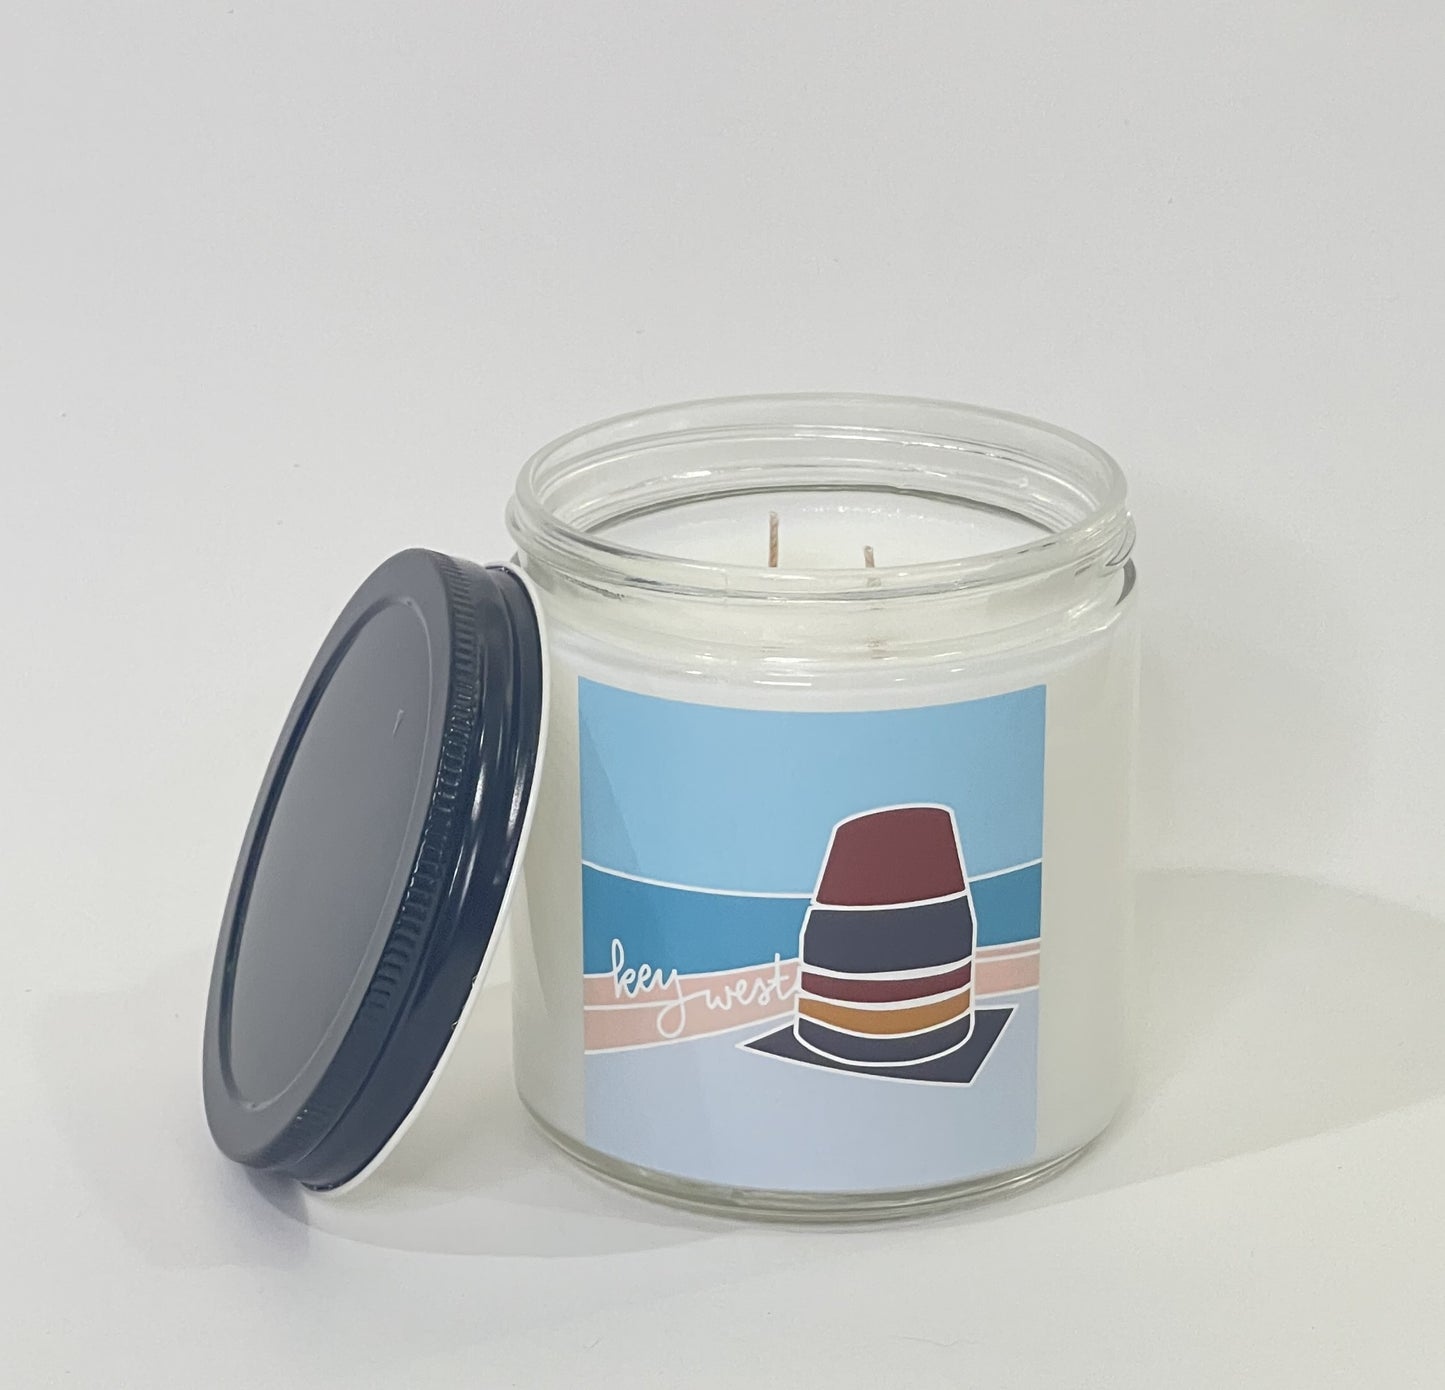 The Key West Candle